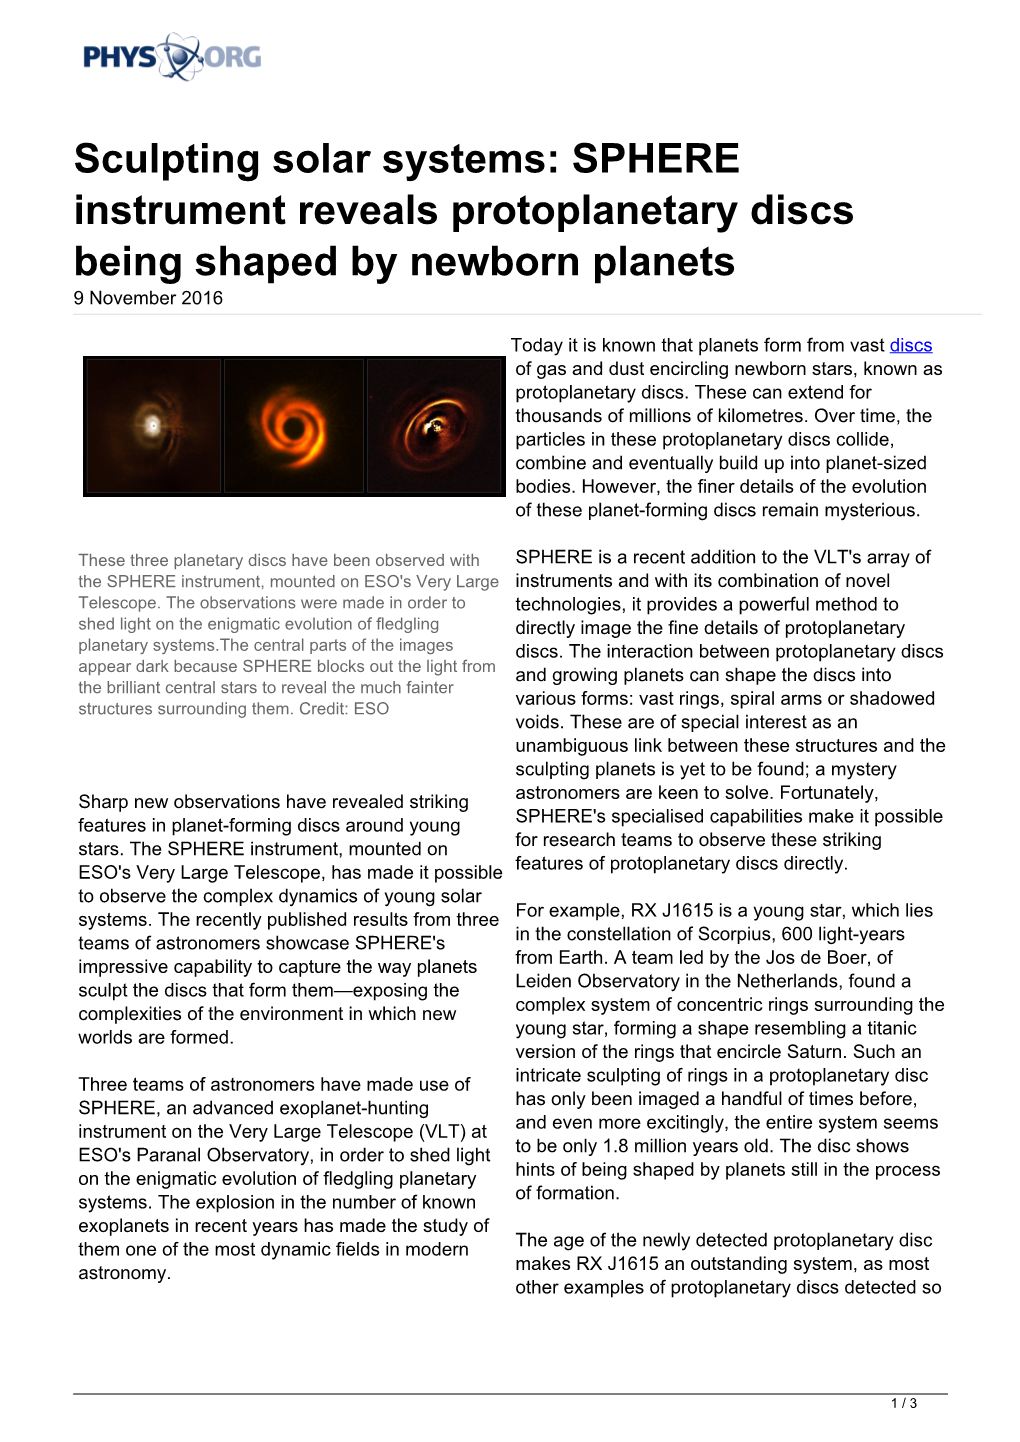 Sculpting Solar Systems: SPHERE Instrument Reveals Protoplanetary Discs Being Shaped by Newborn Planets 9 November 2016